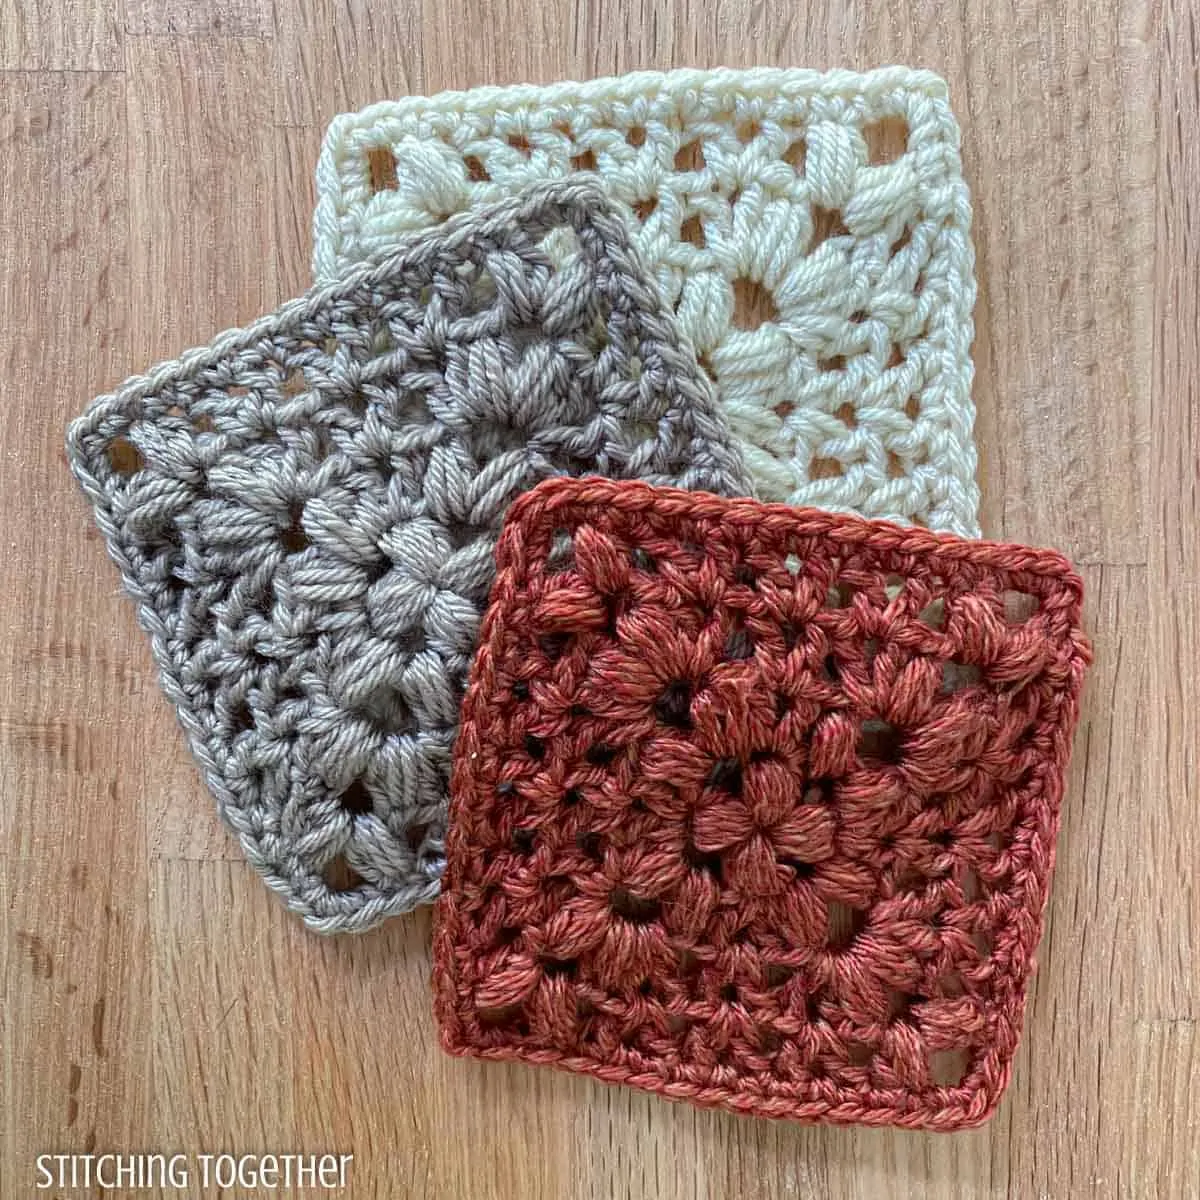 How to Read Crochet Patterns in Chart Form